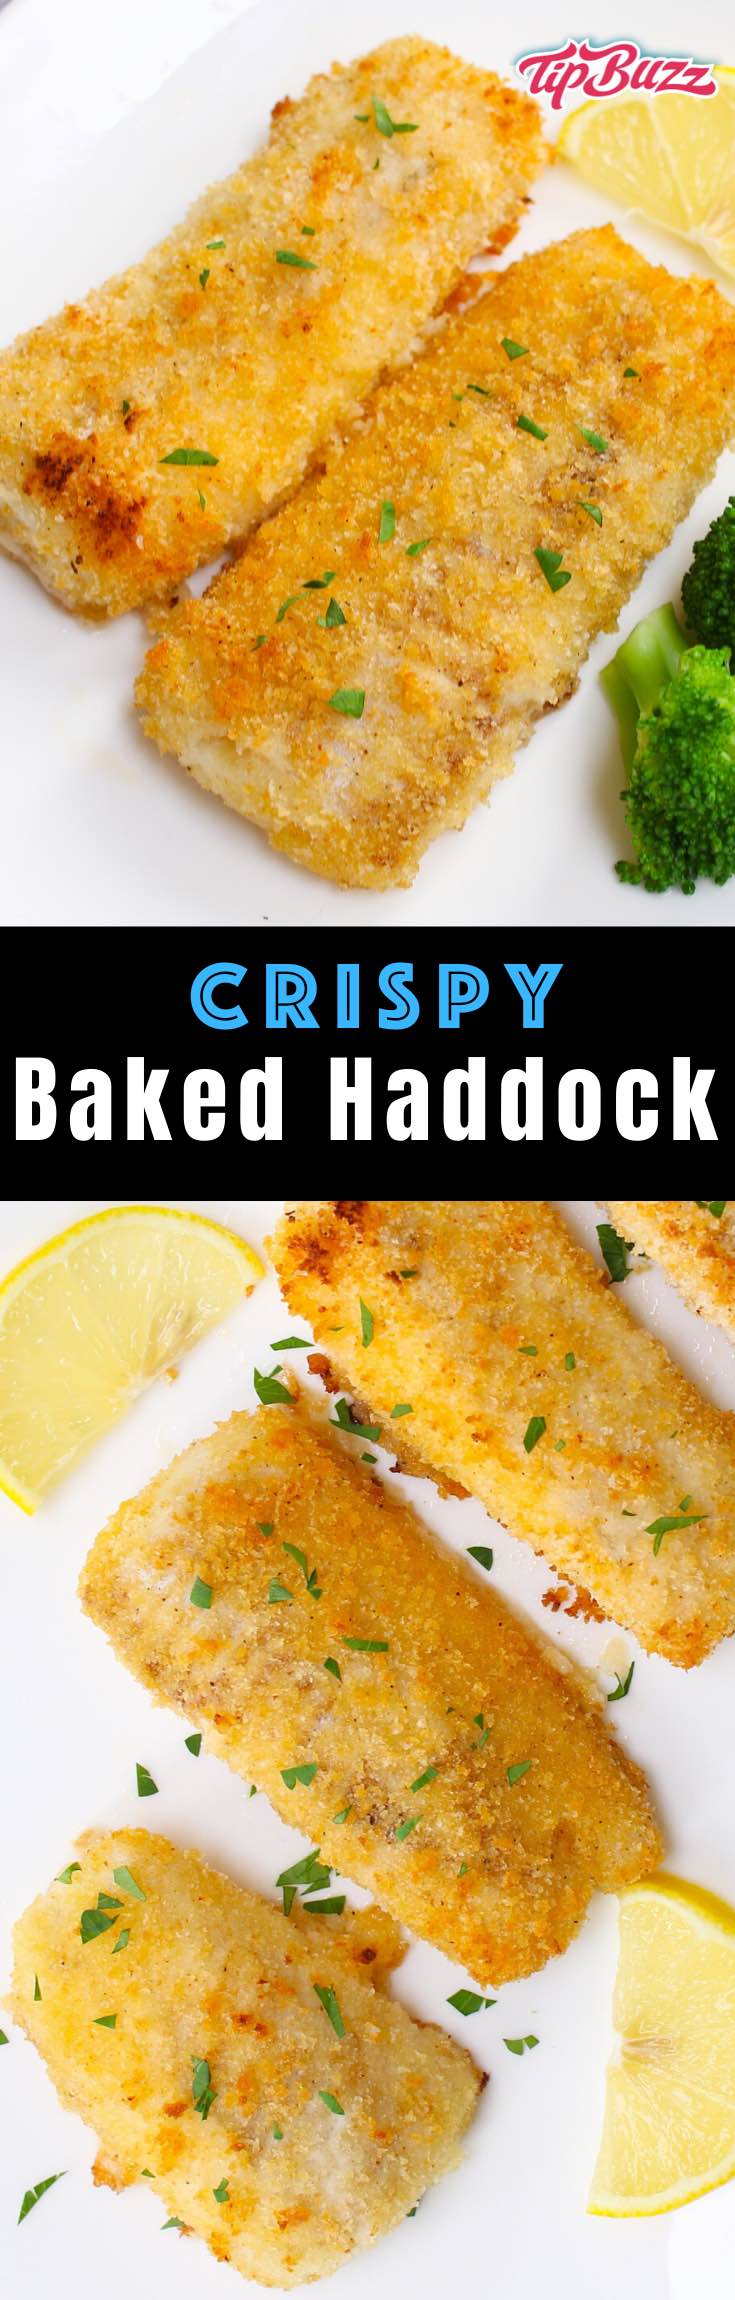 Crispy Baked Haddock with mild flavor and ready in just 15 minutes for a healthy dinner option that's easy to make!